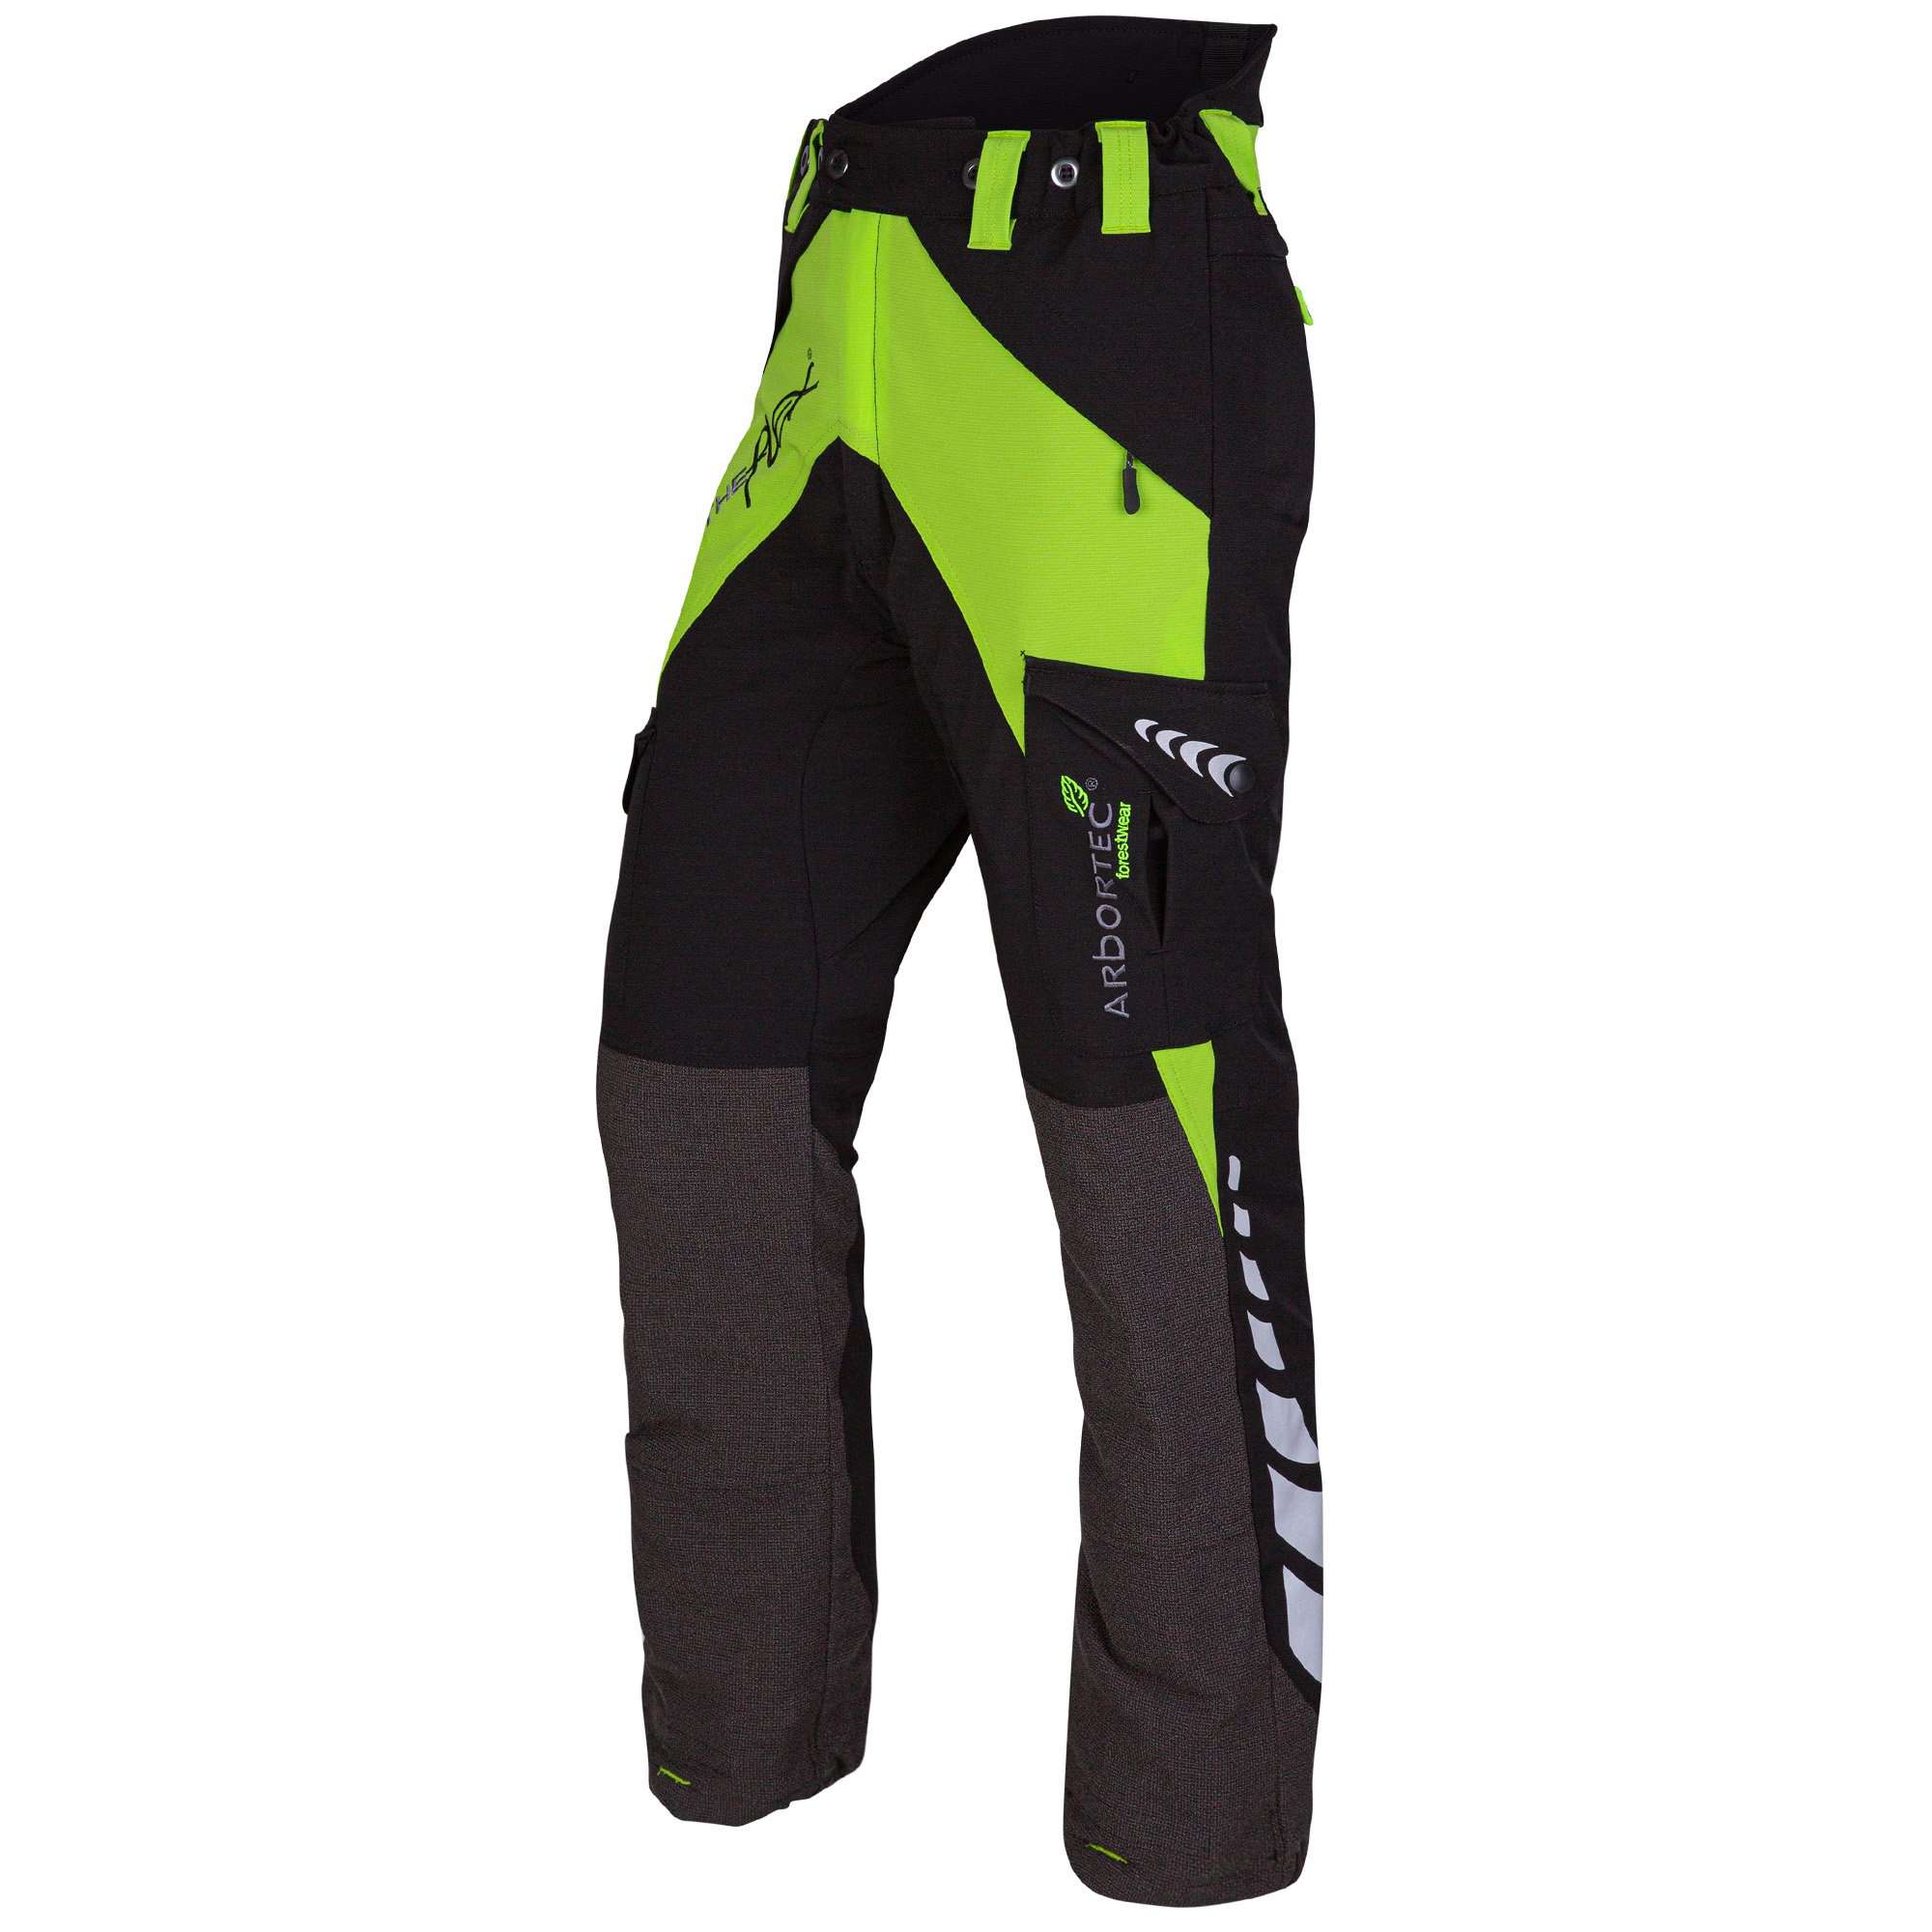 AT4040 Breatheflex Chainsaw Trousers Design C Class 2 - Lime